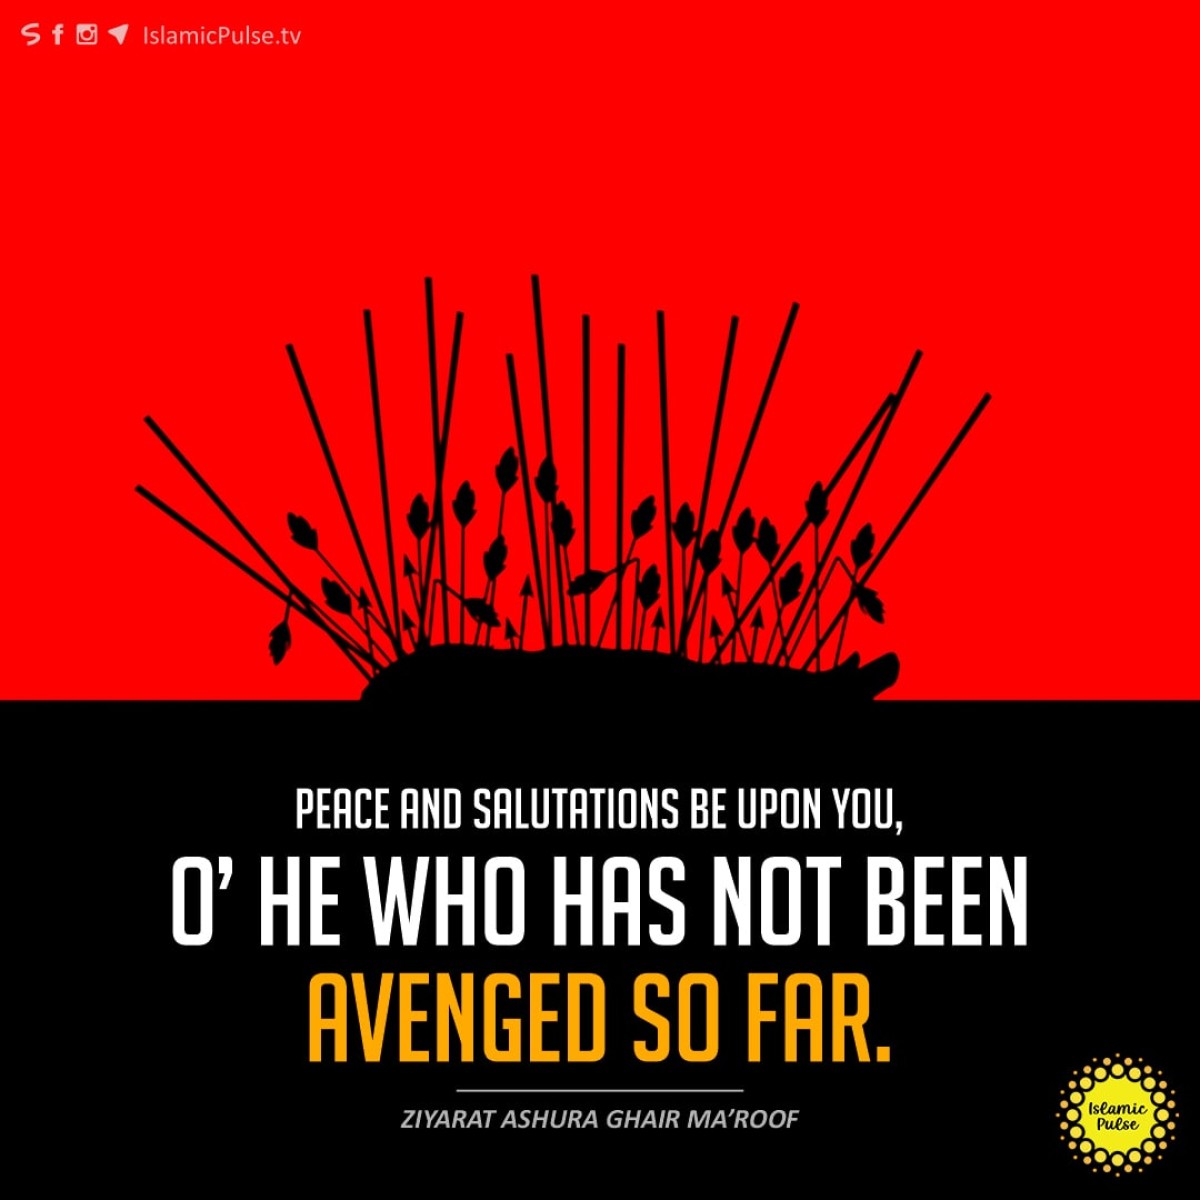 "Peace and salutations be upon you, O’ he who has not been avenged so far."